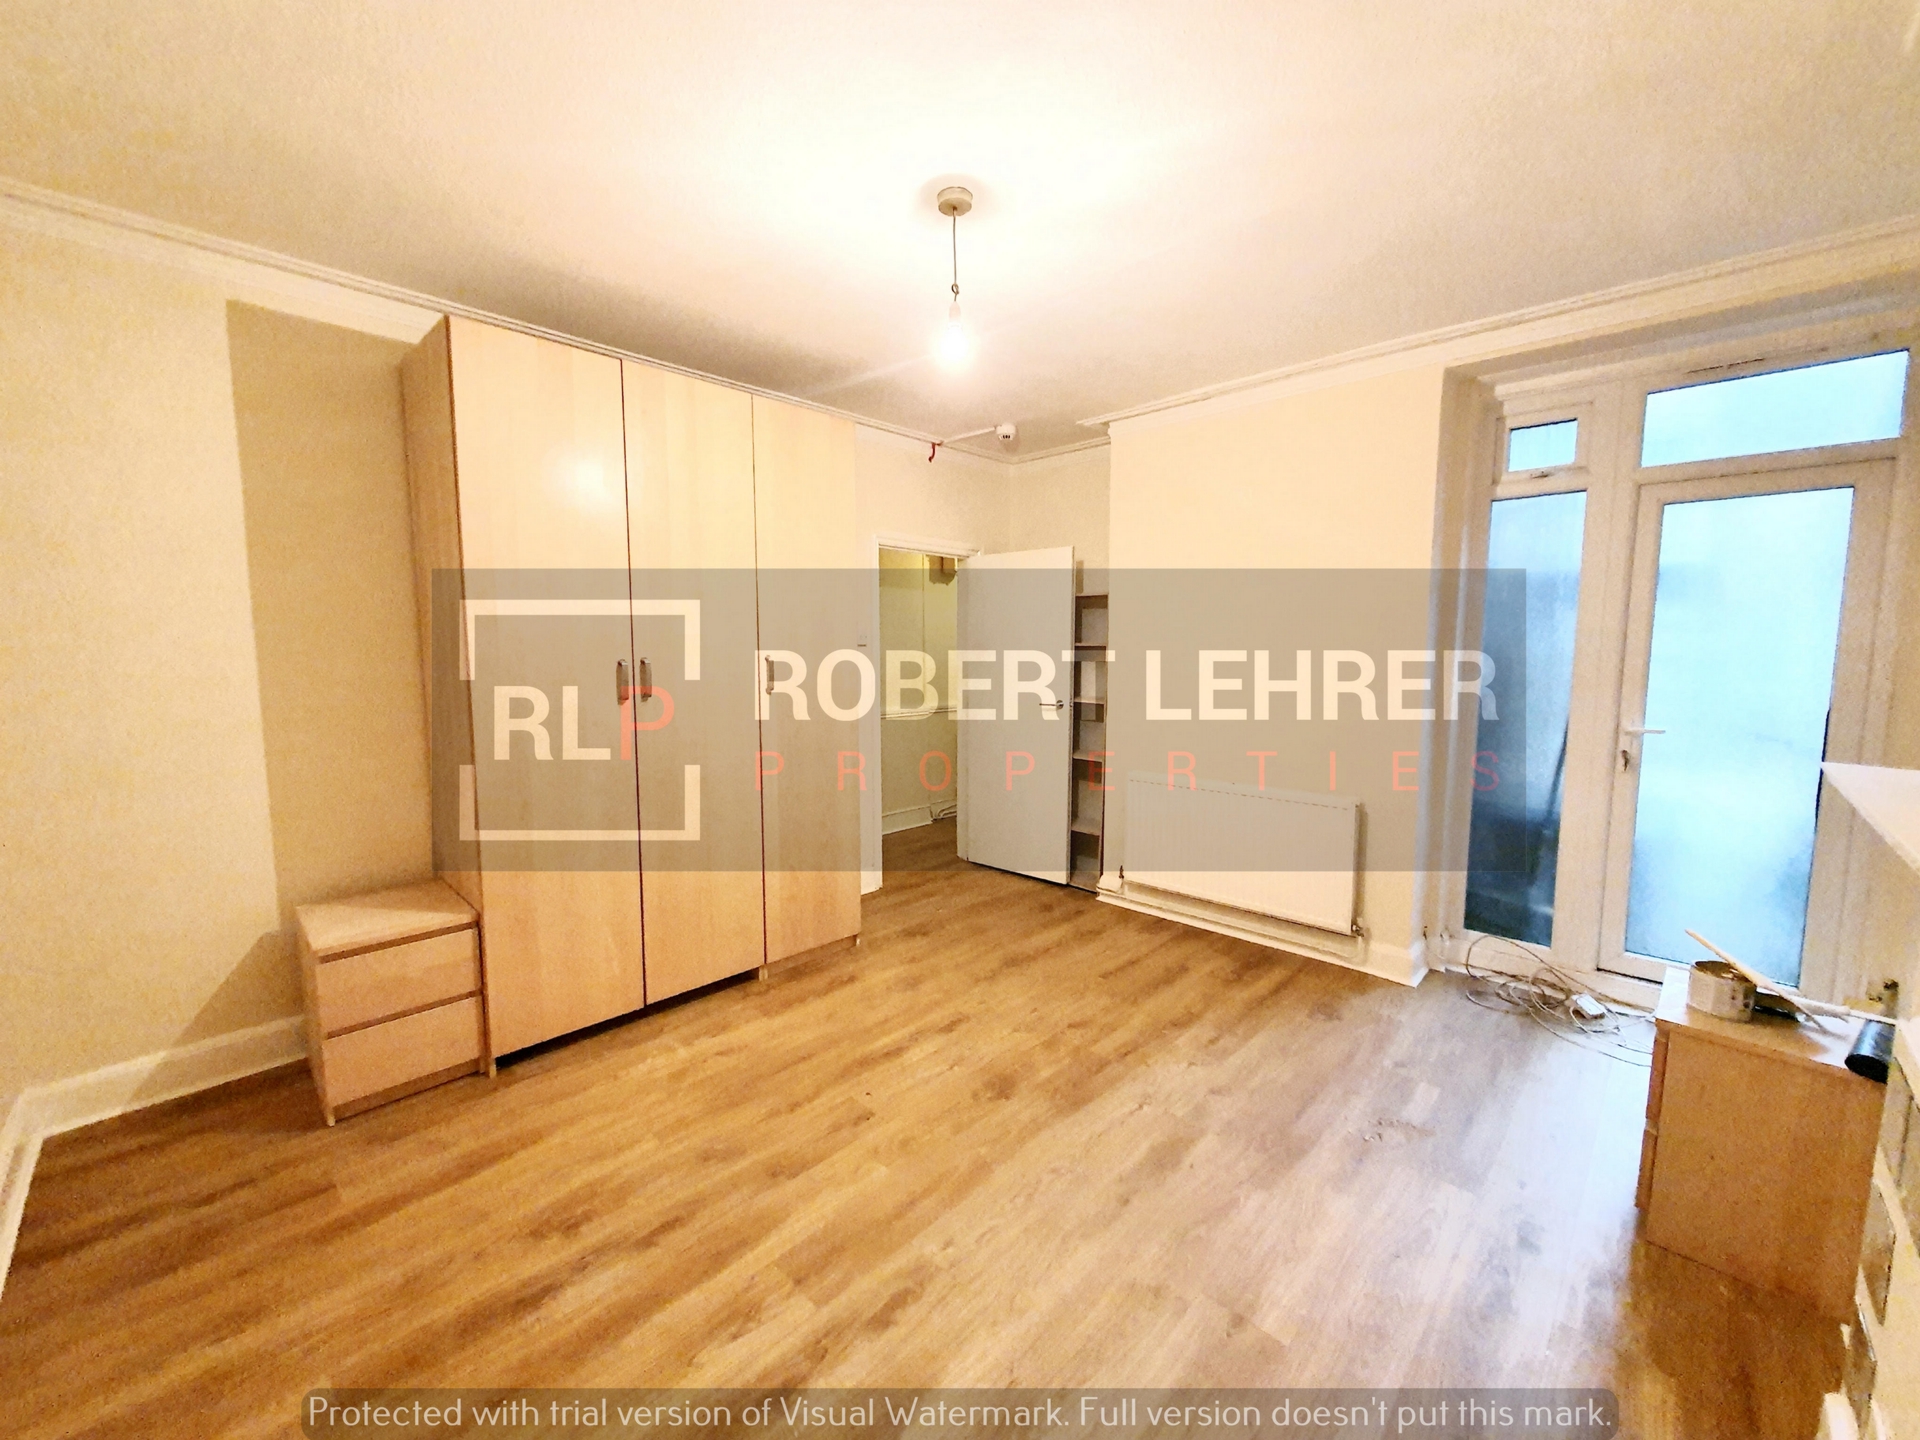 1 Bedroom Apartment to rent in Highgate, London, N6